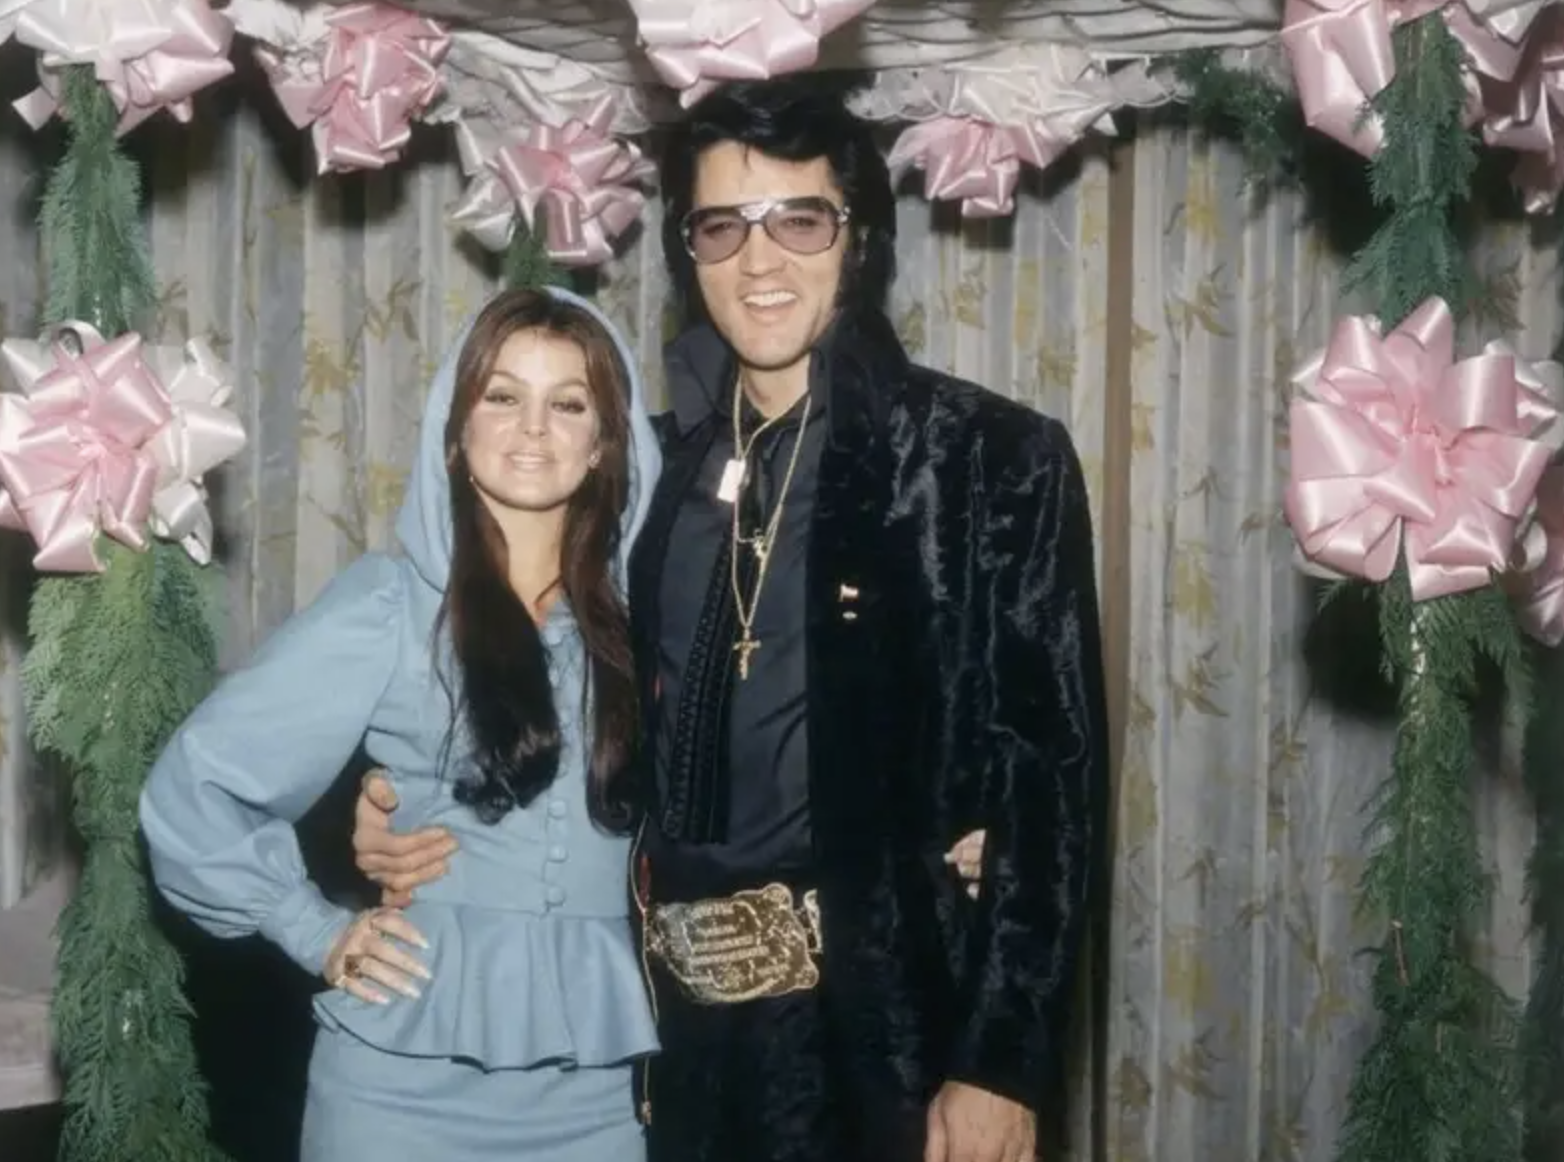 “Elvis Presley was 24 years old when he started seeing 14 year old Priscilla.”